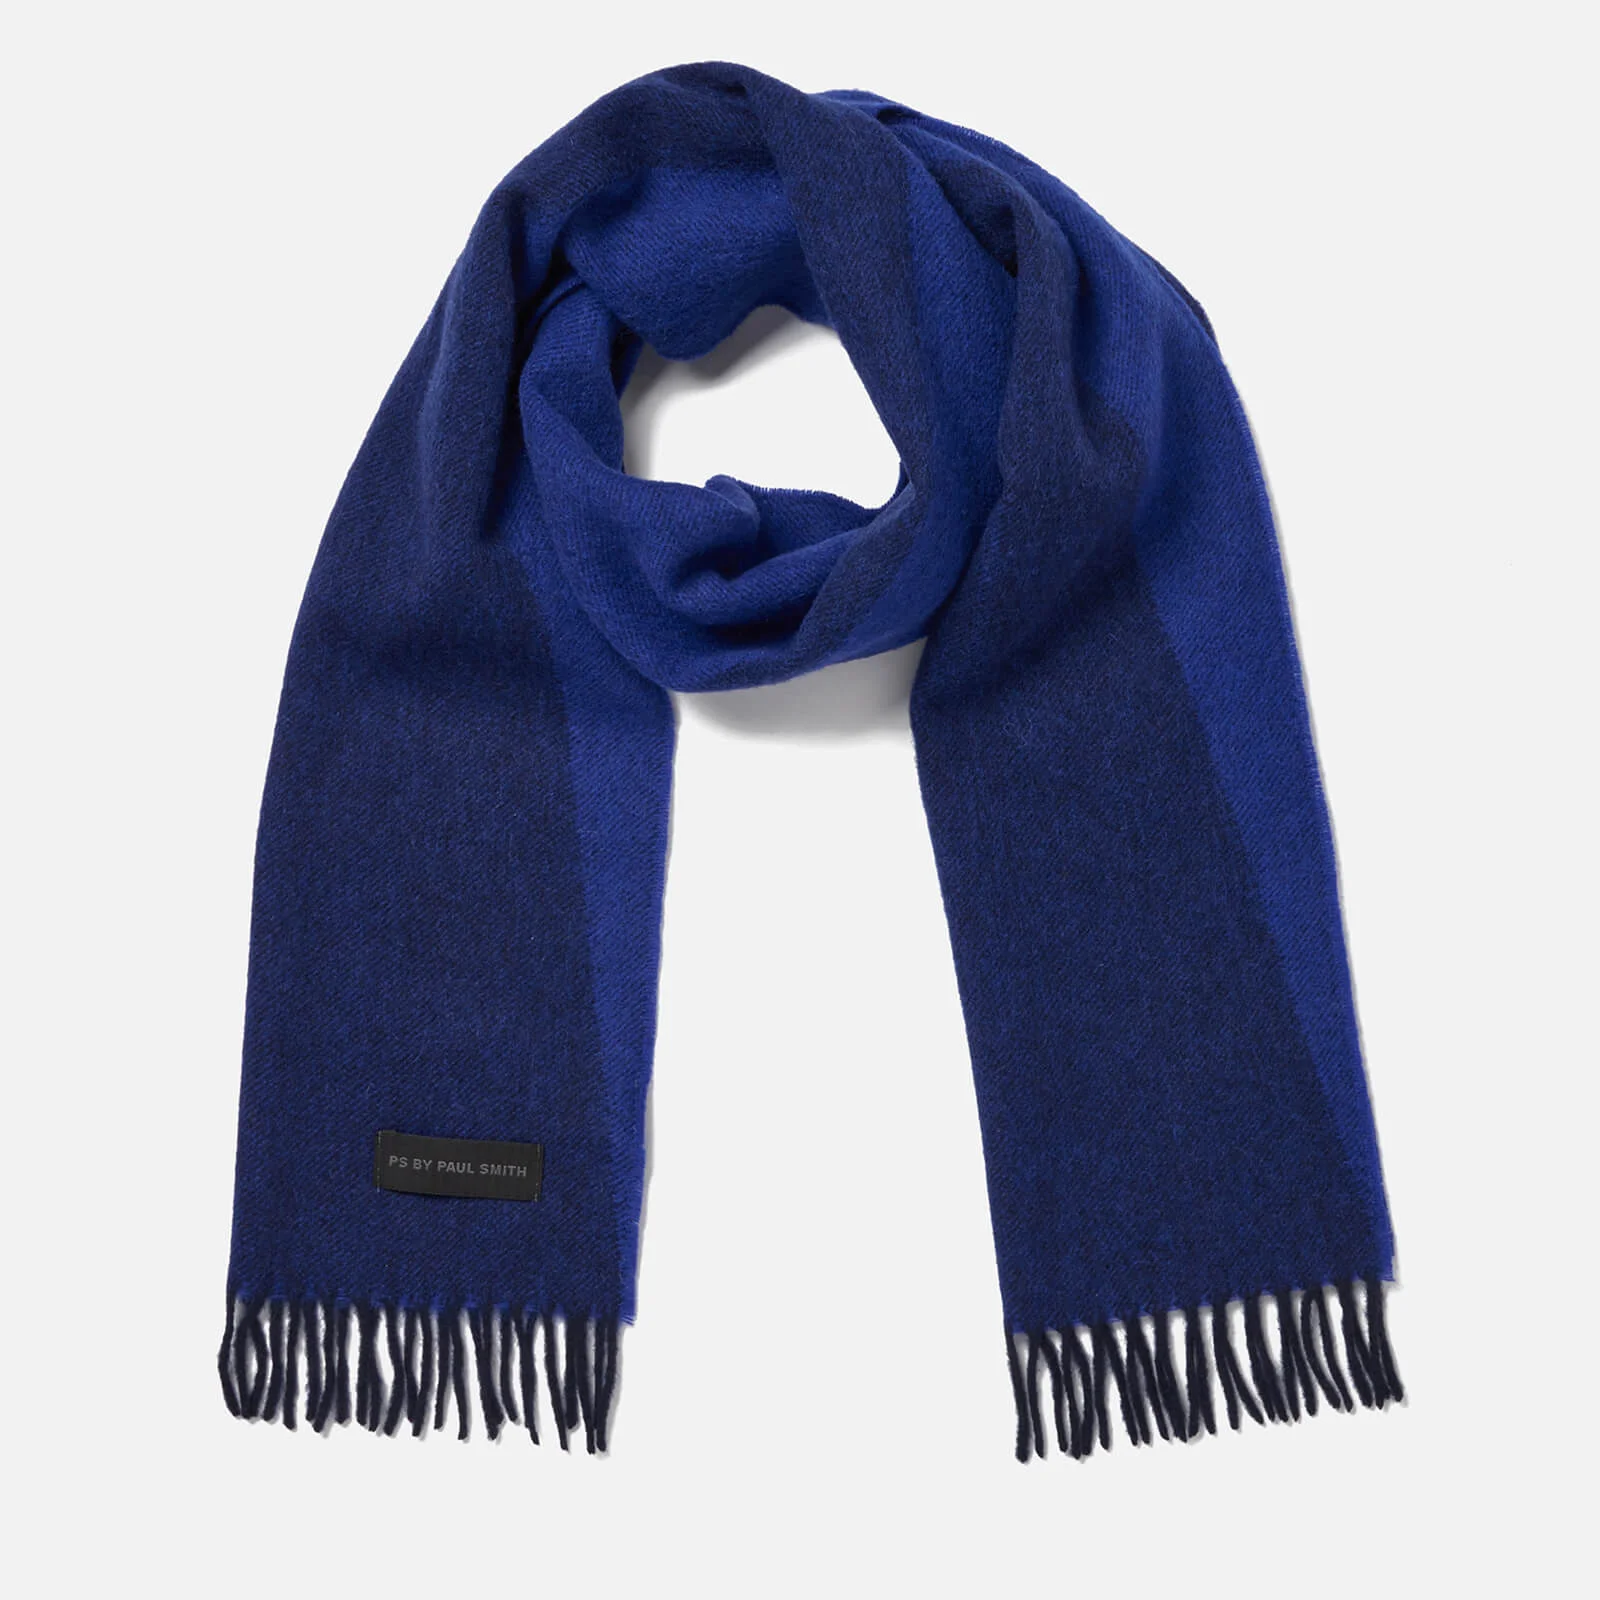 PS by Paul Smith Men's Flag Scarf - Blue Image 1